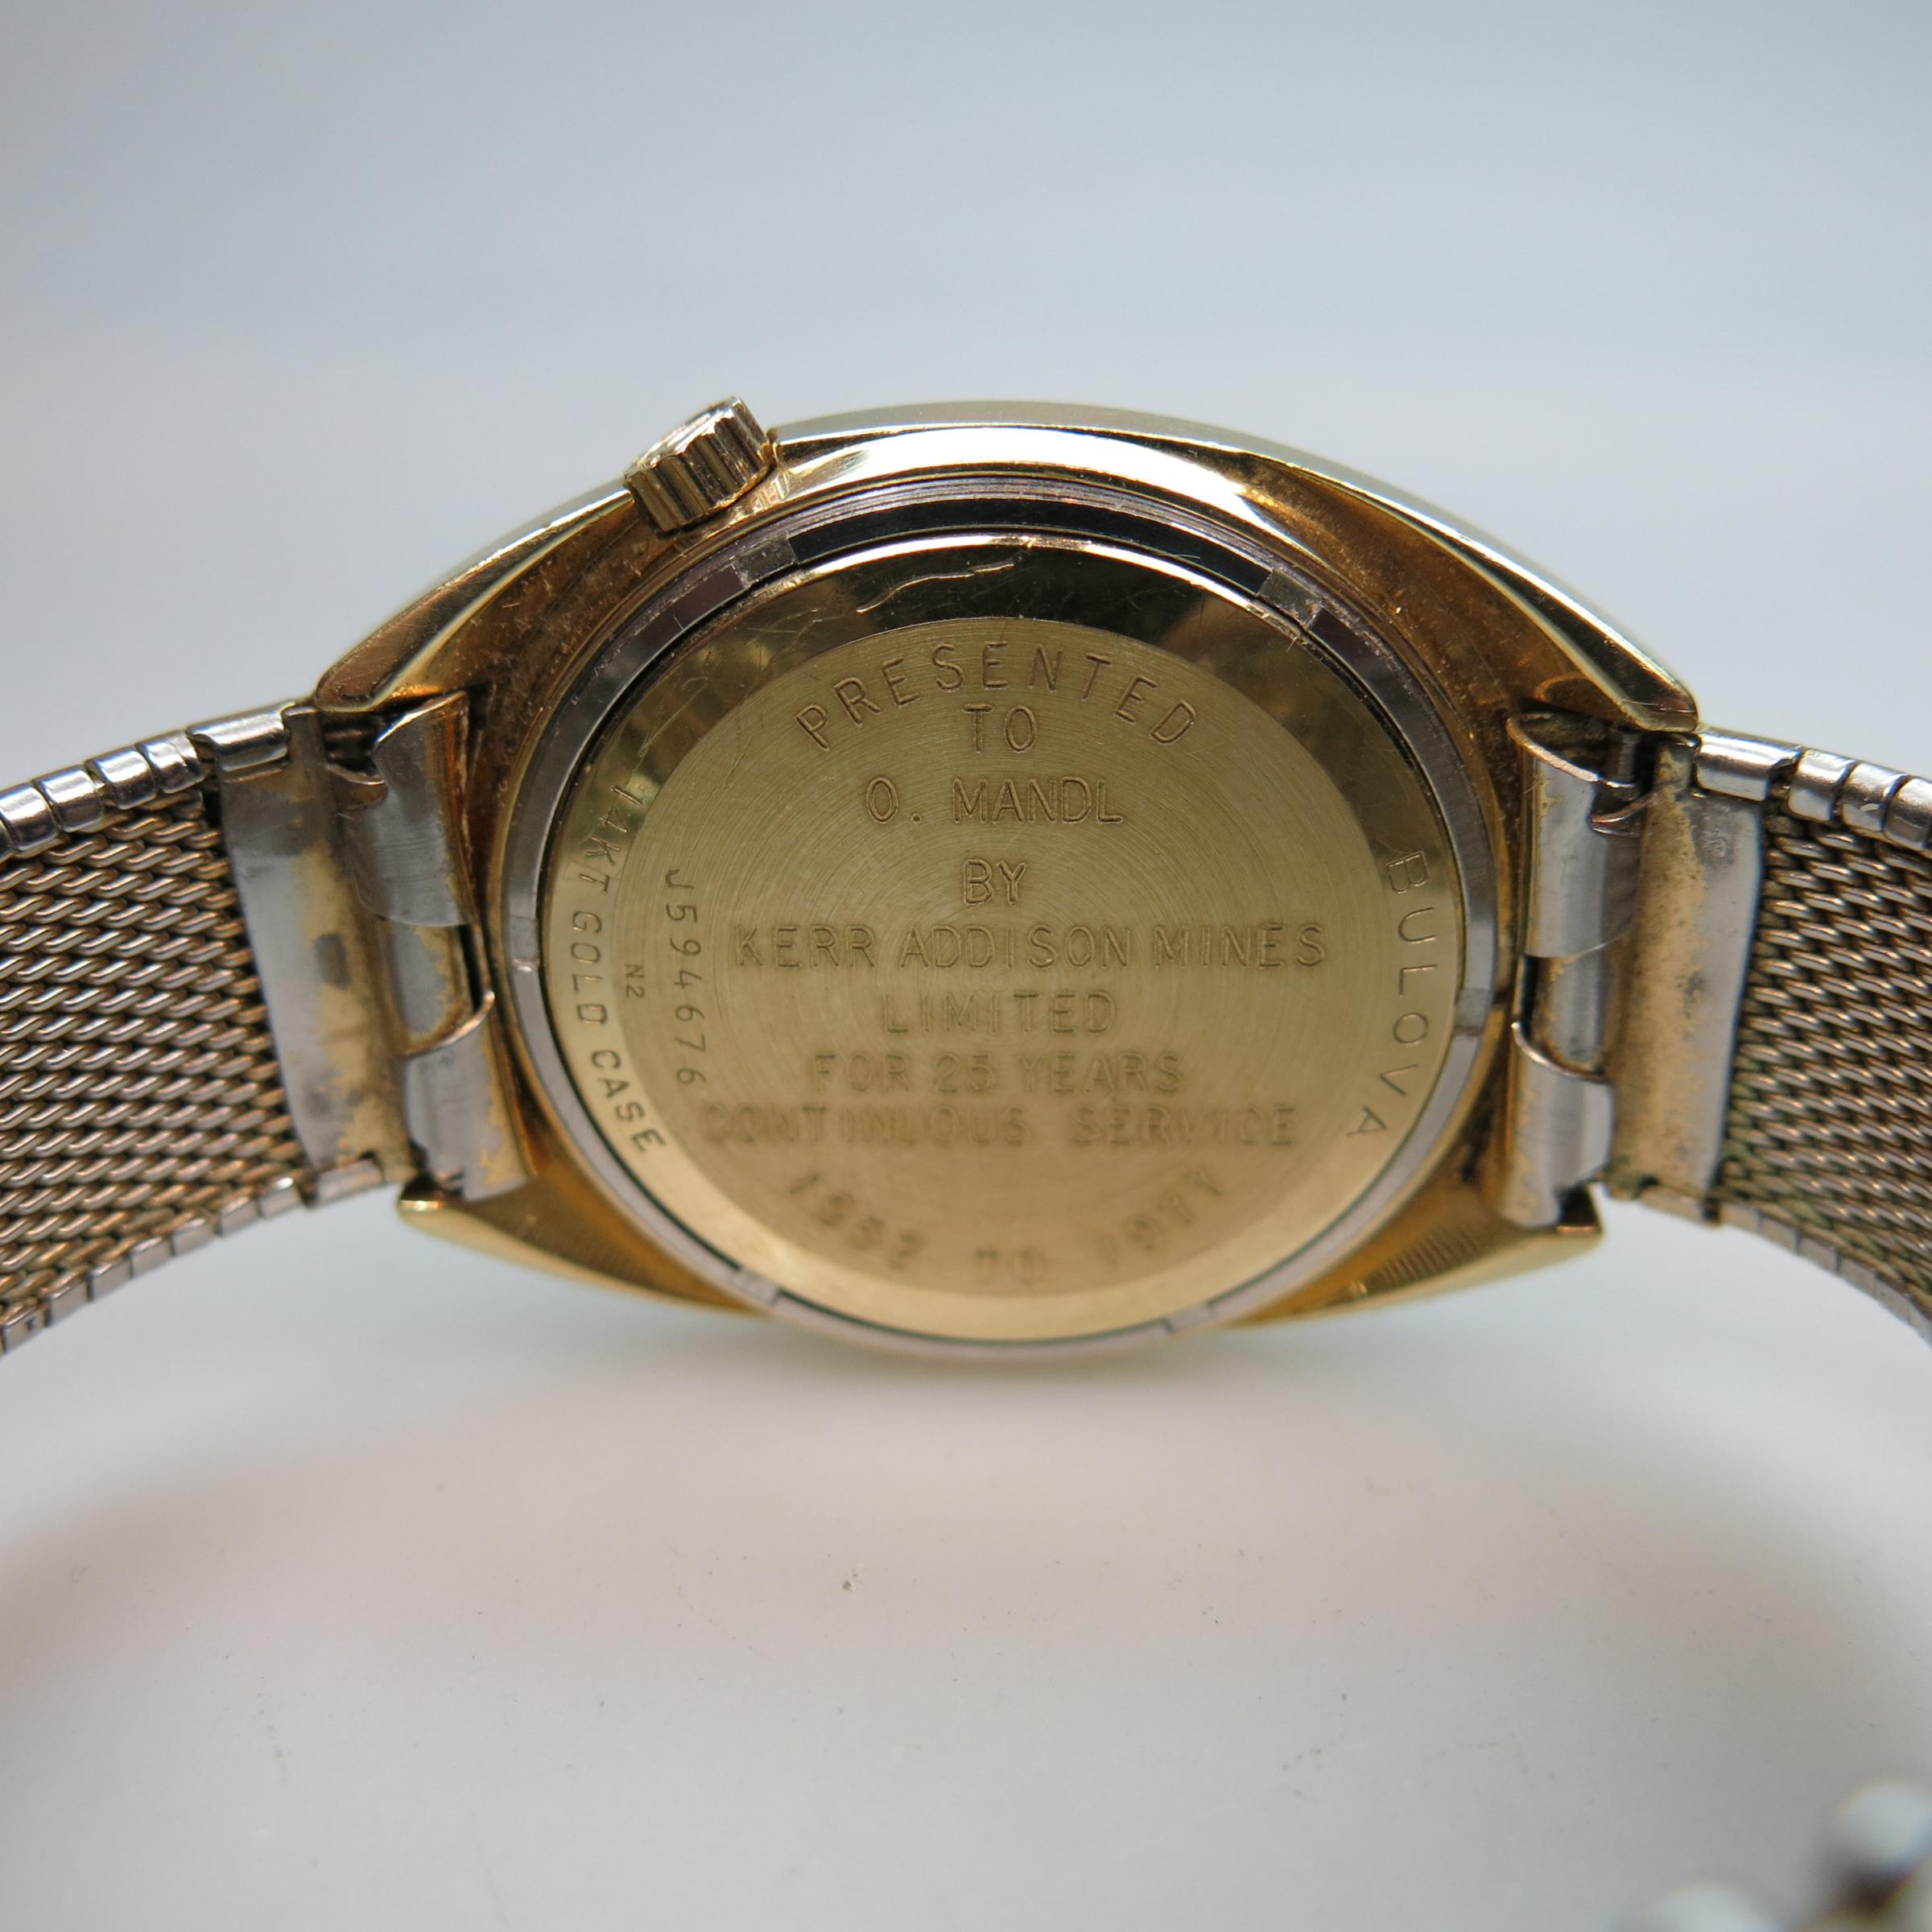 Bulova Accutron Wristwatch With Day And Date